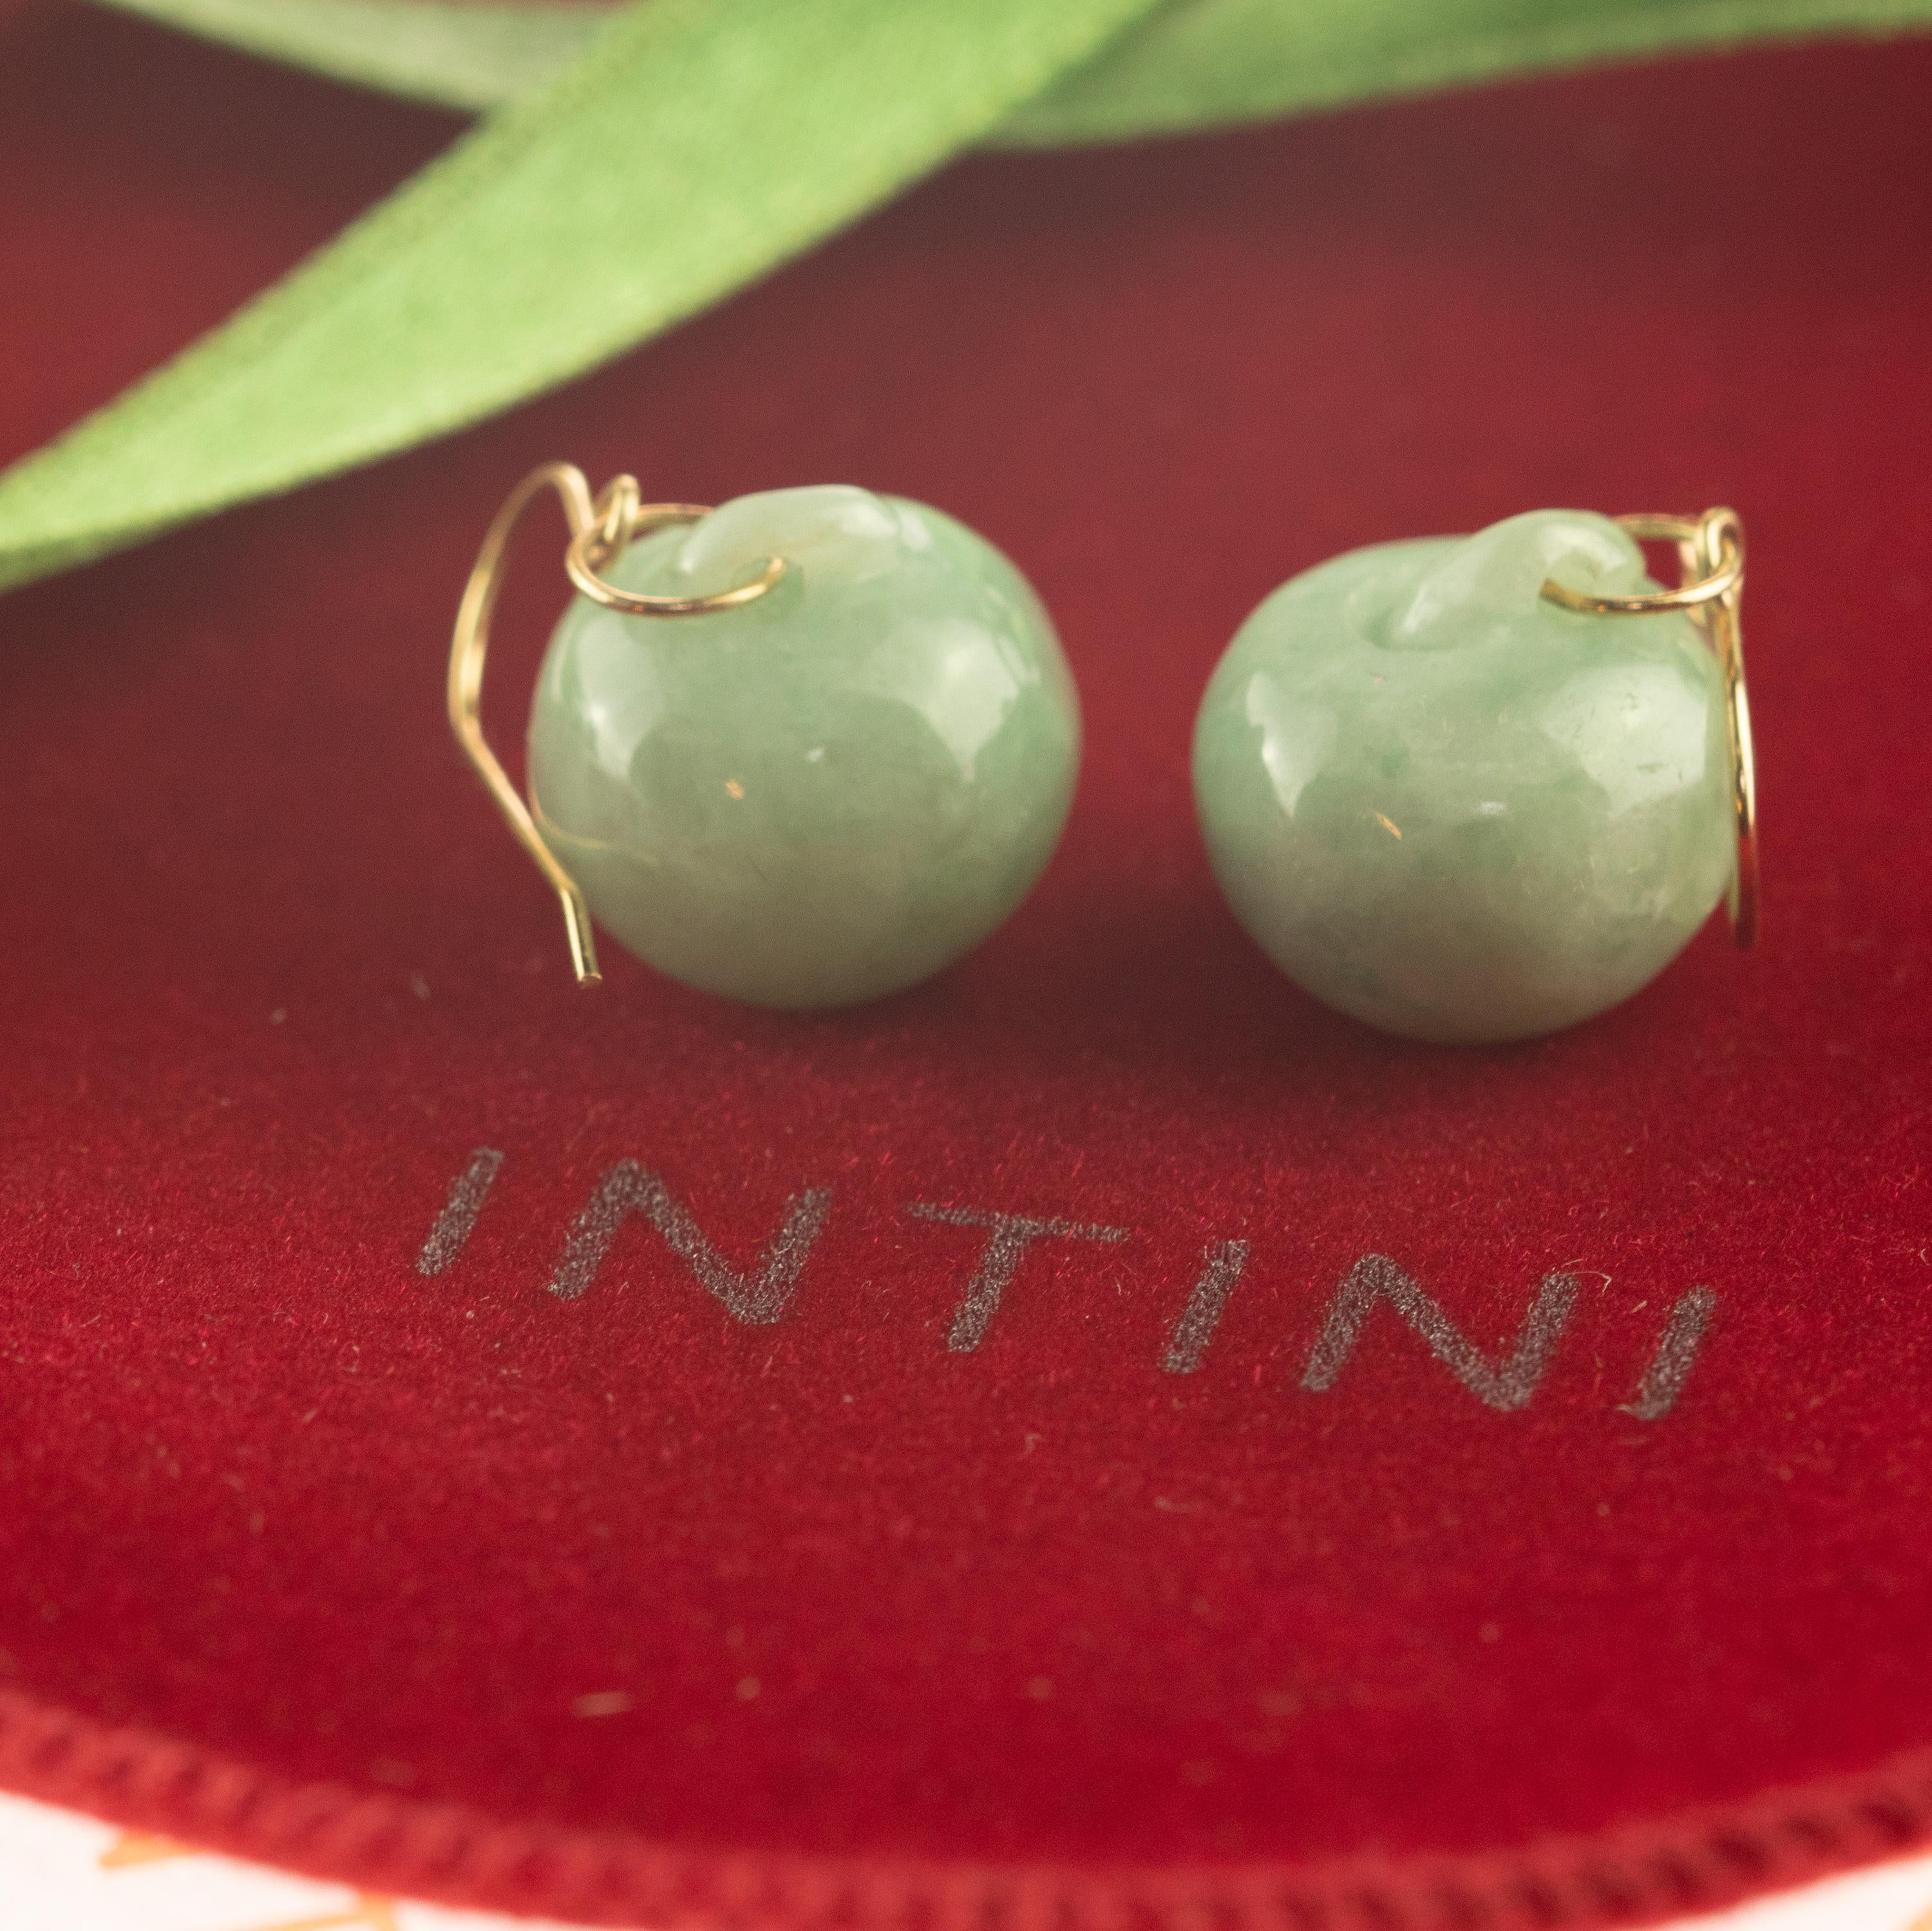 Light weighted handmade green Natural jade balls or fruits earrings born in the Intini Jewels workshop. Our designers add all the Italian modern style and glamour in one exquisite piece. Stunning crafted jade gems, hanging from 18 karat yellow gold